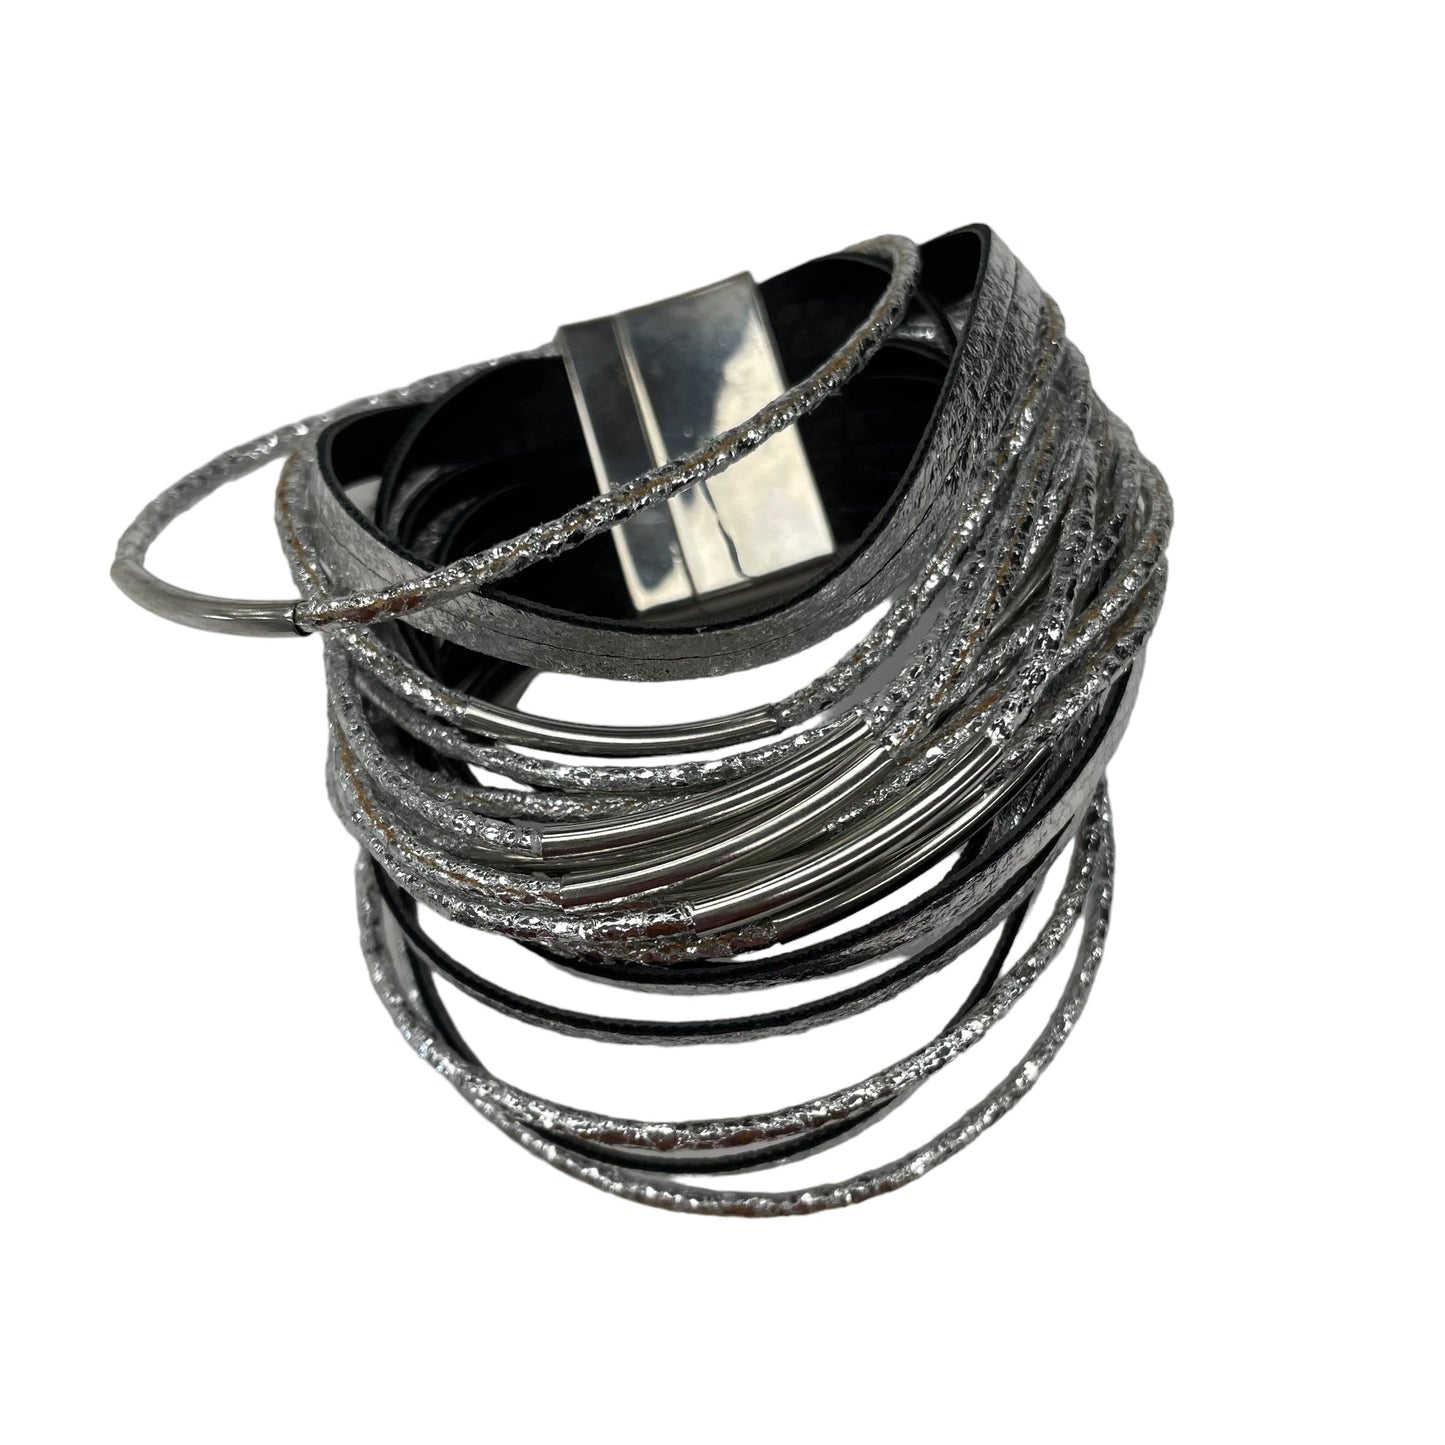 SILVER BRACELET CUFF by CLOTHES MENTOR